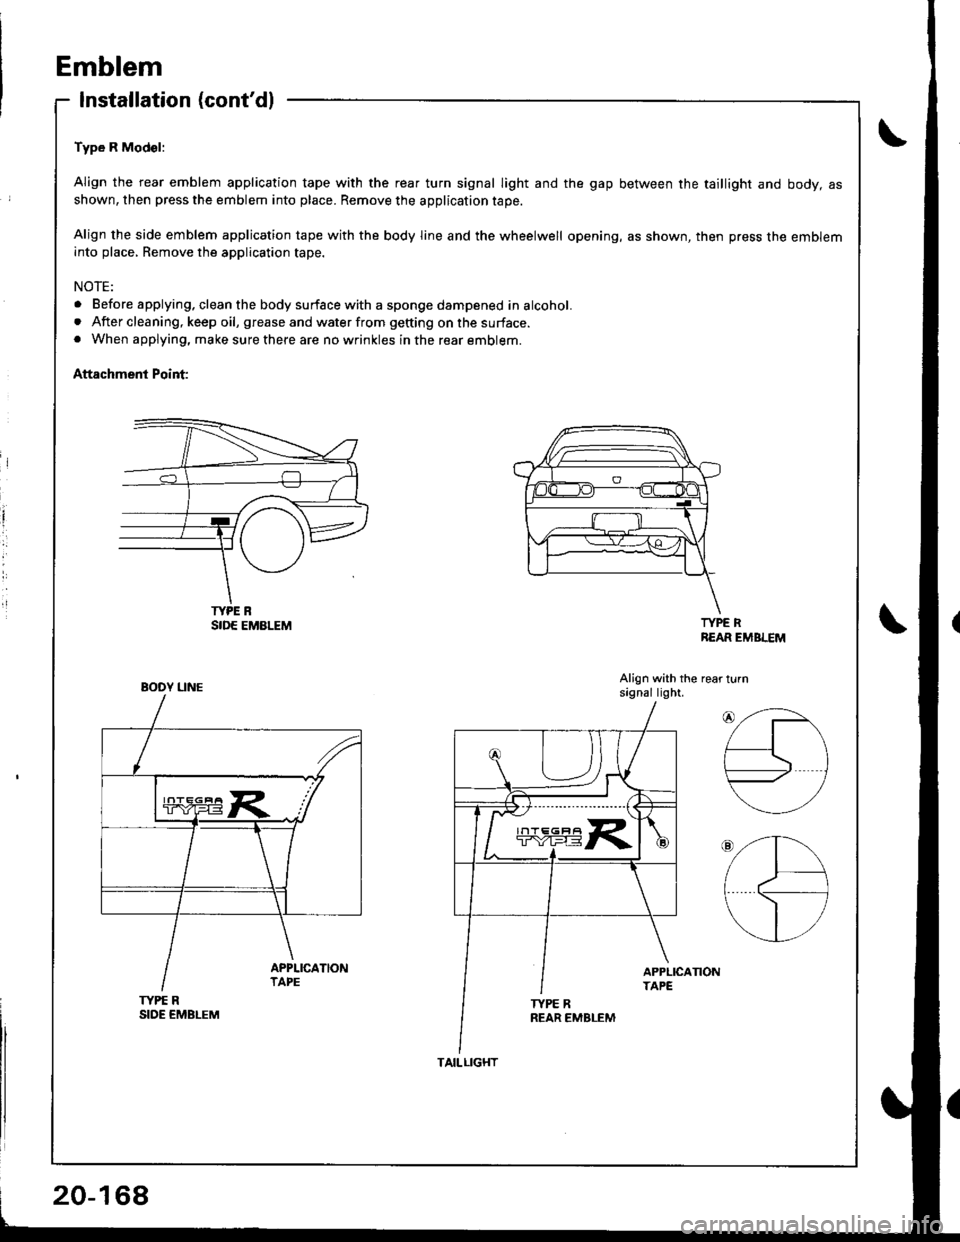 HONDA INTEGRA 1998 4.G Workshop Manual Emblem
Installation (contdl
Type R Mod€l:
Align the rear emblem application tape with the reaf turn signal light and the gap between the taillight and body, asshown, then press the emblem into plac